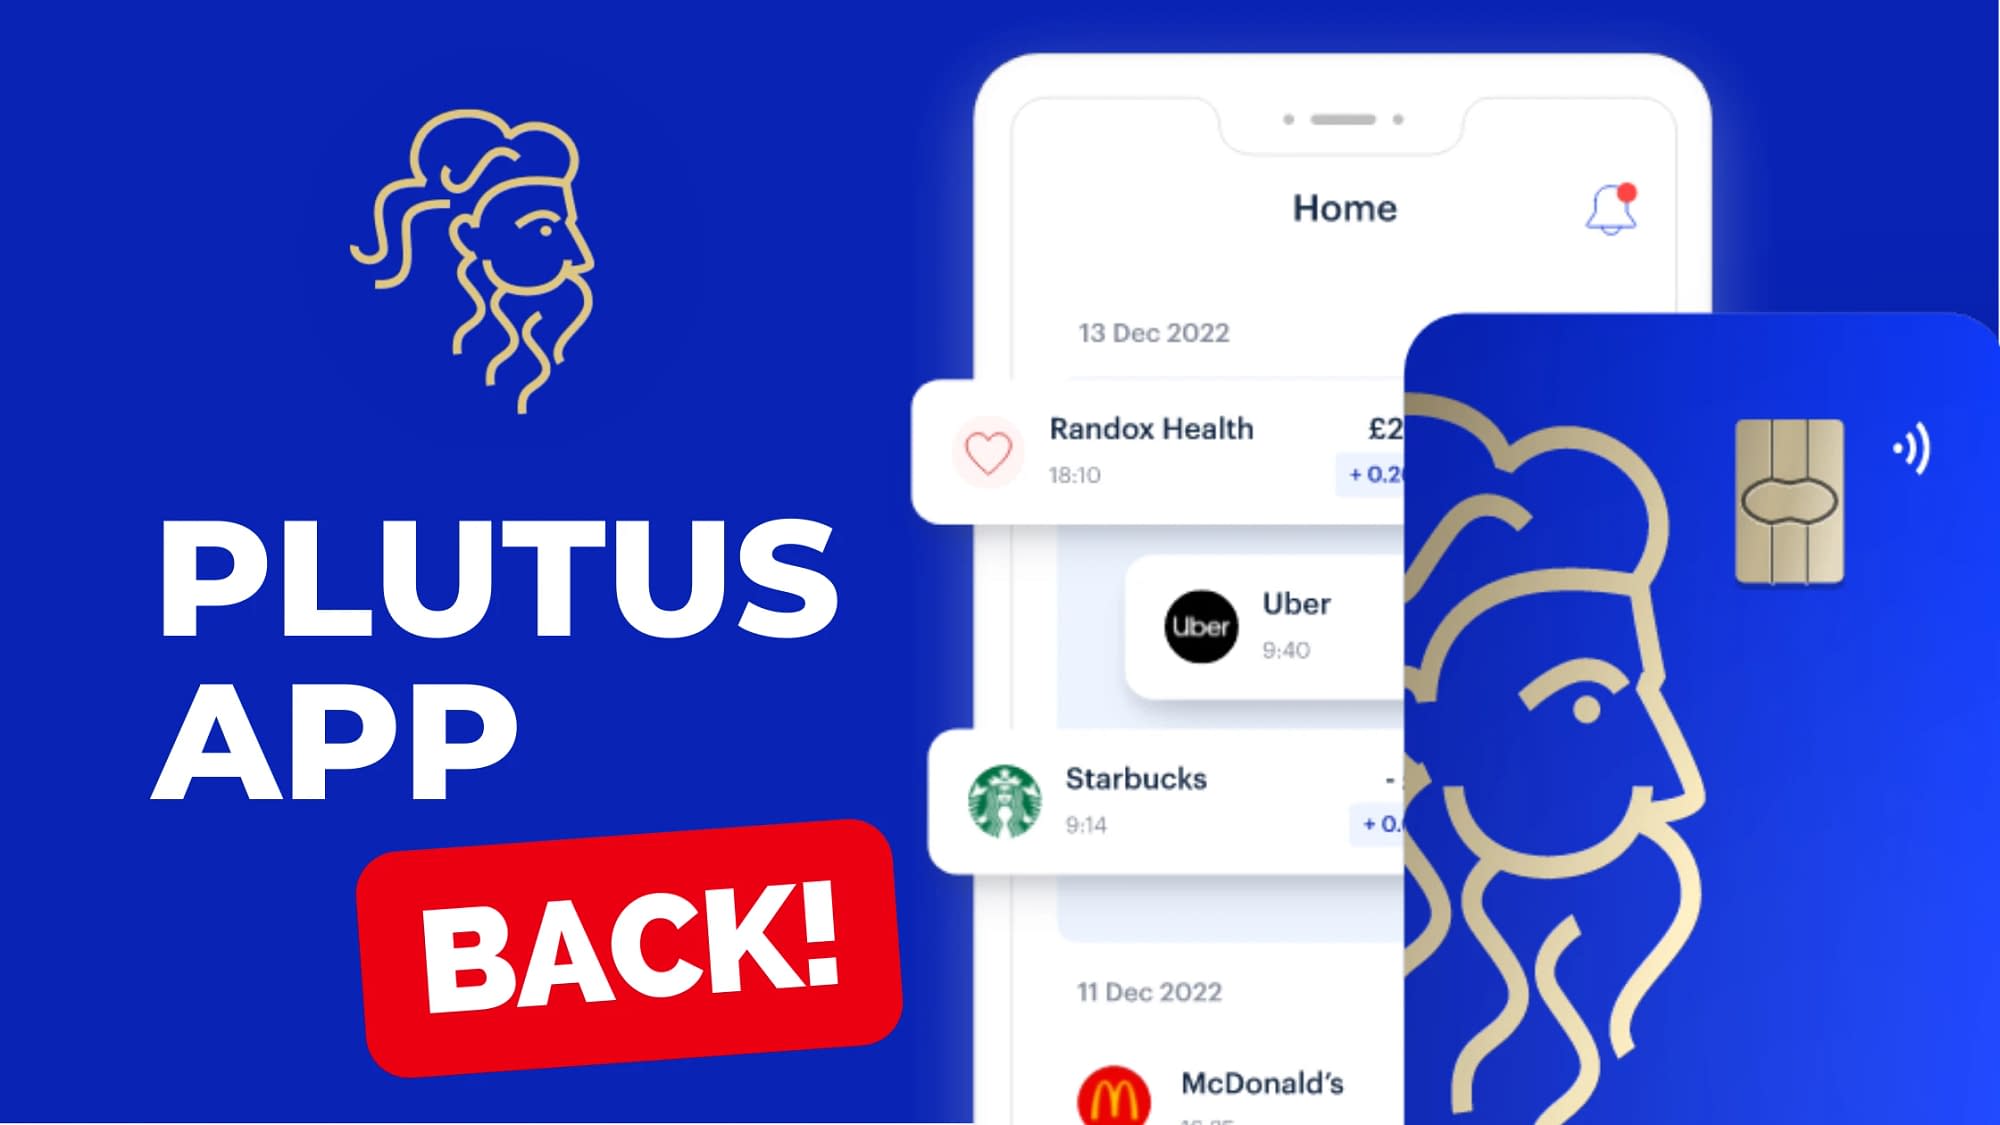 Plutus is back! Plutus app is now live again.